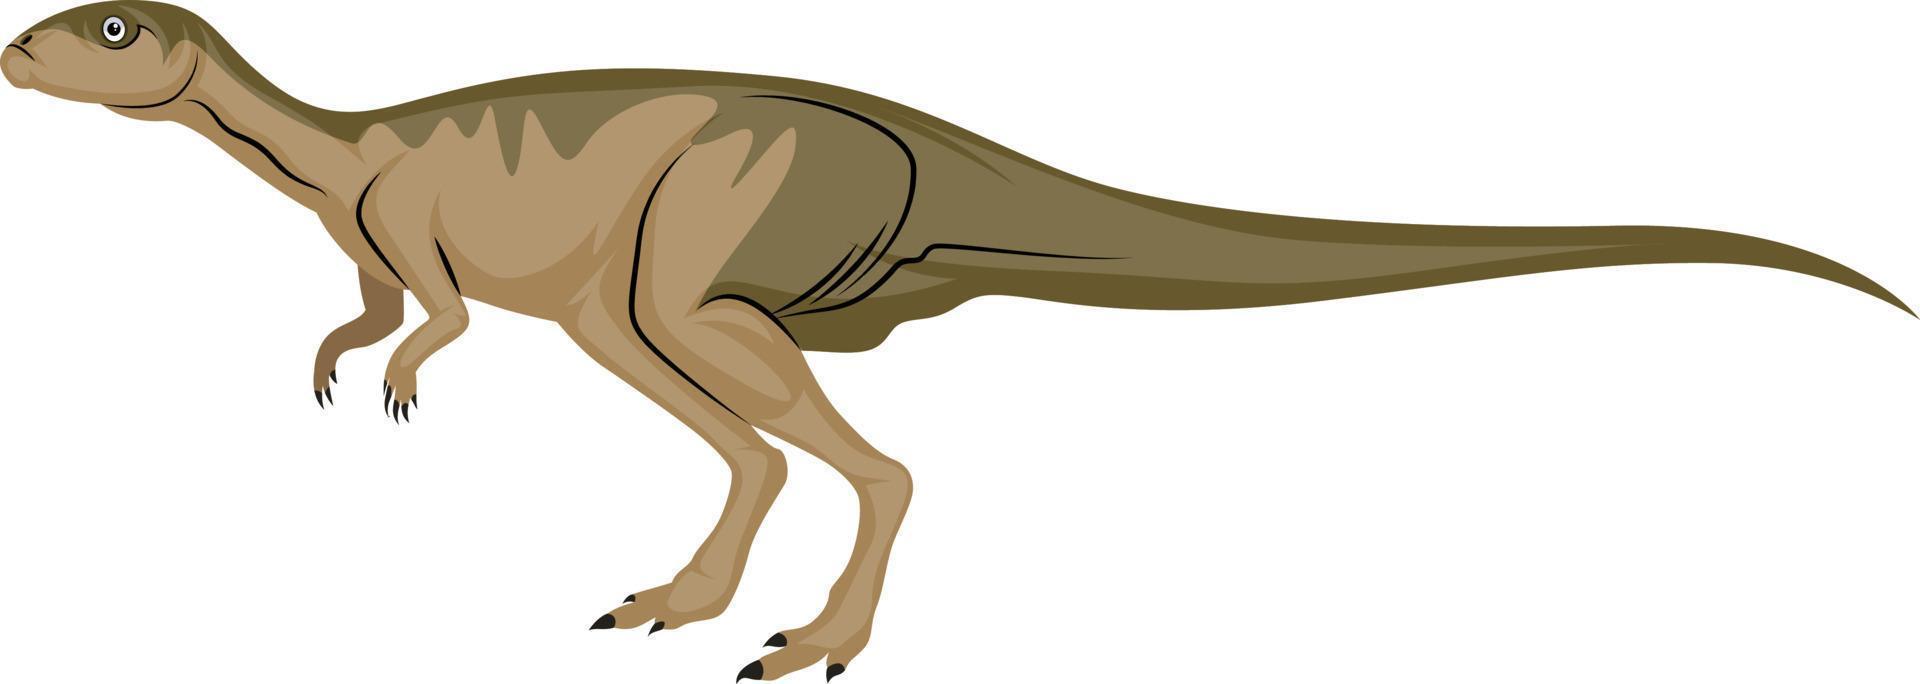 Dinosour with long tail, illustration, vector on white background.